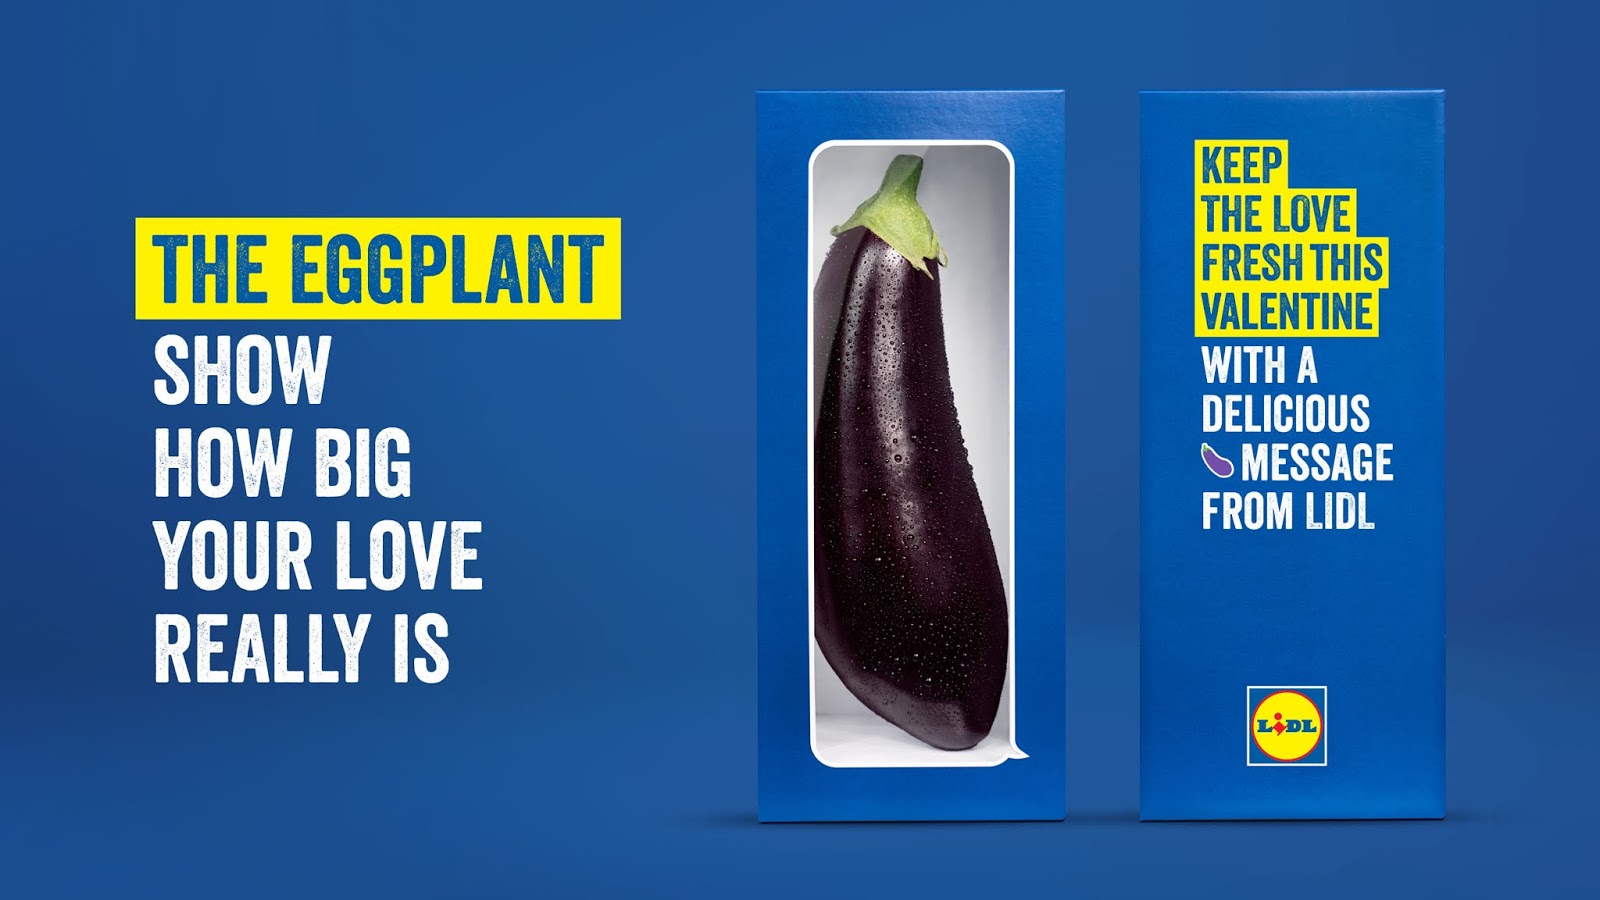 Lidl Keep The Love Fresh | Best Valentines day campaigns - Creative Product Packaging